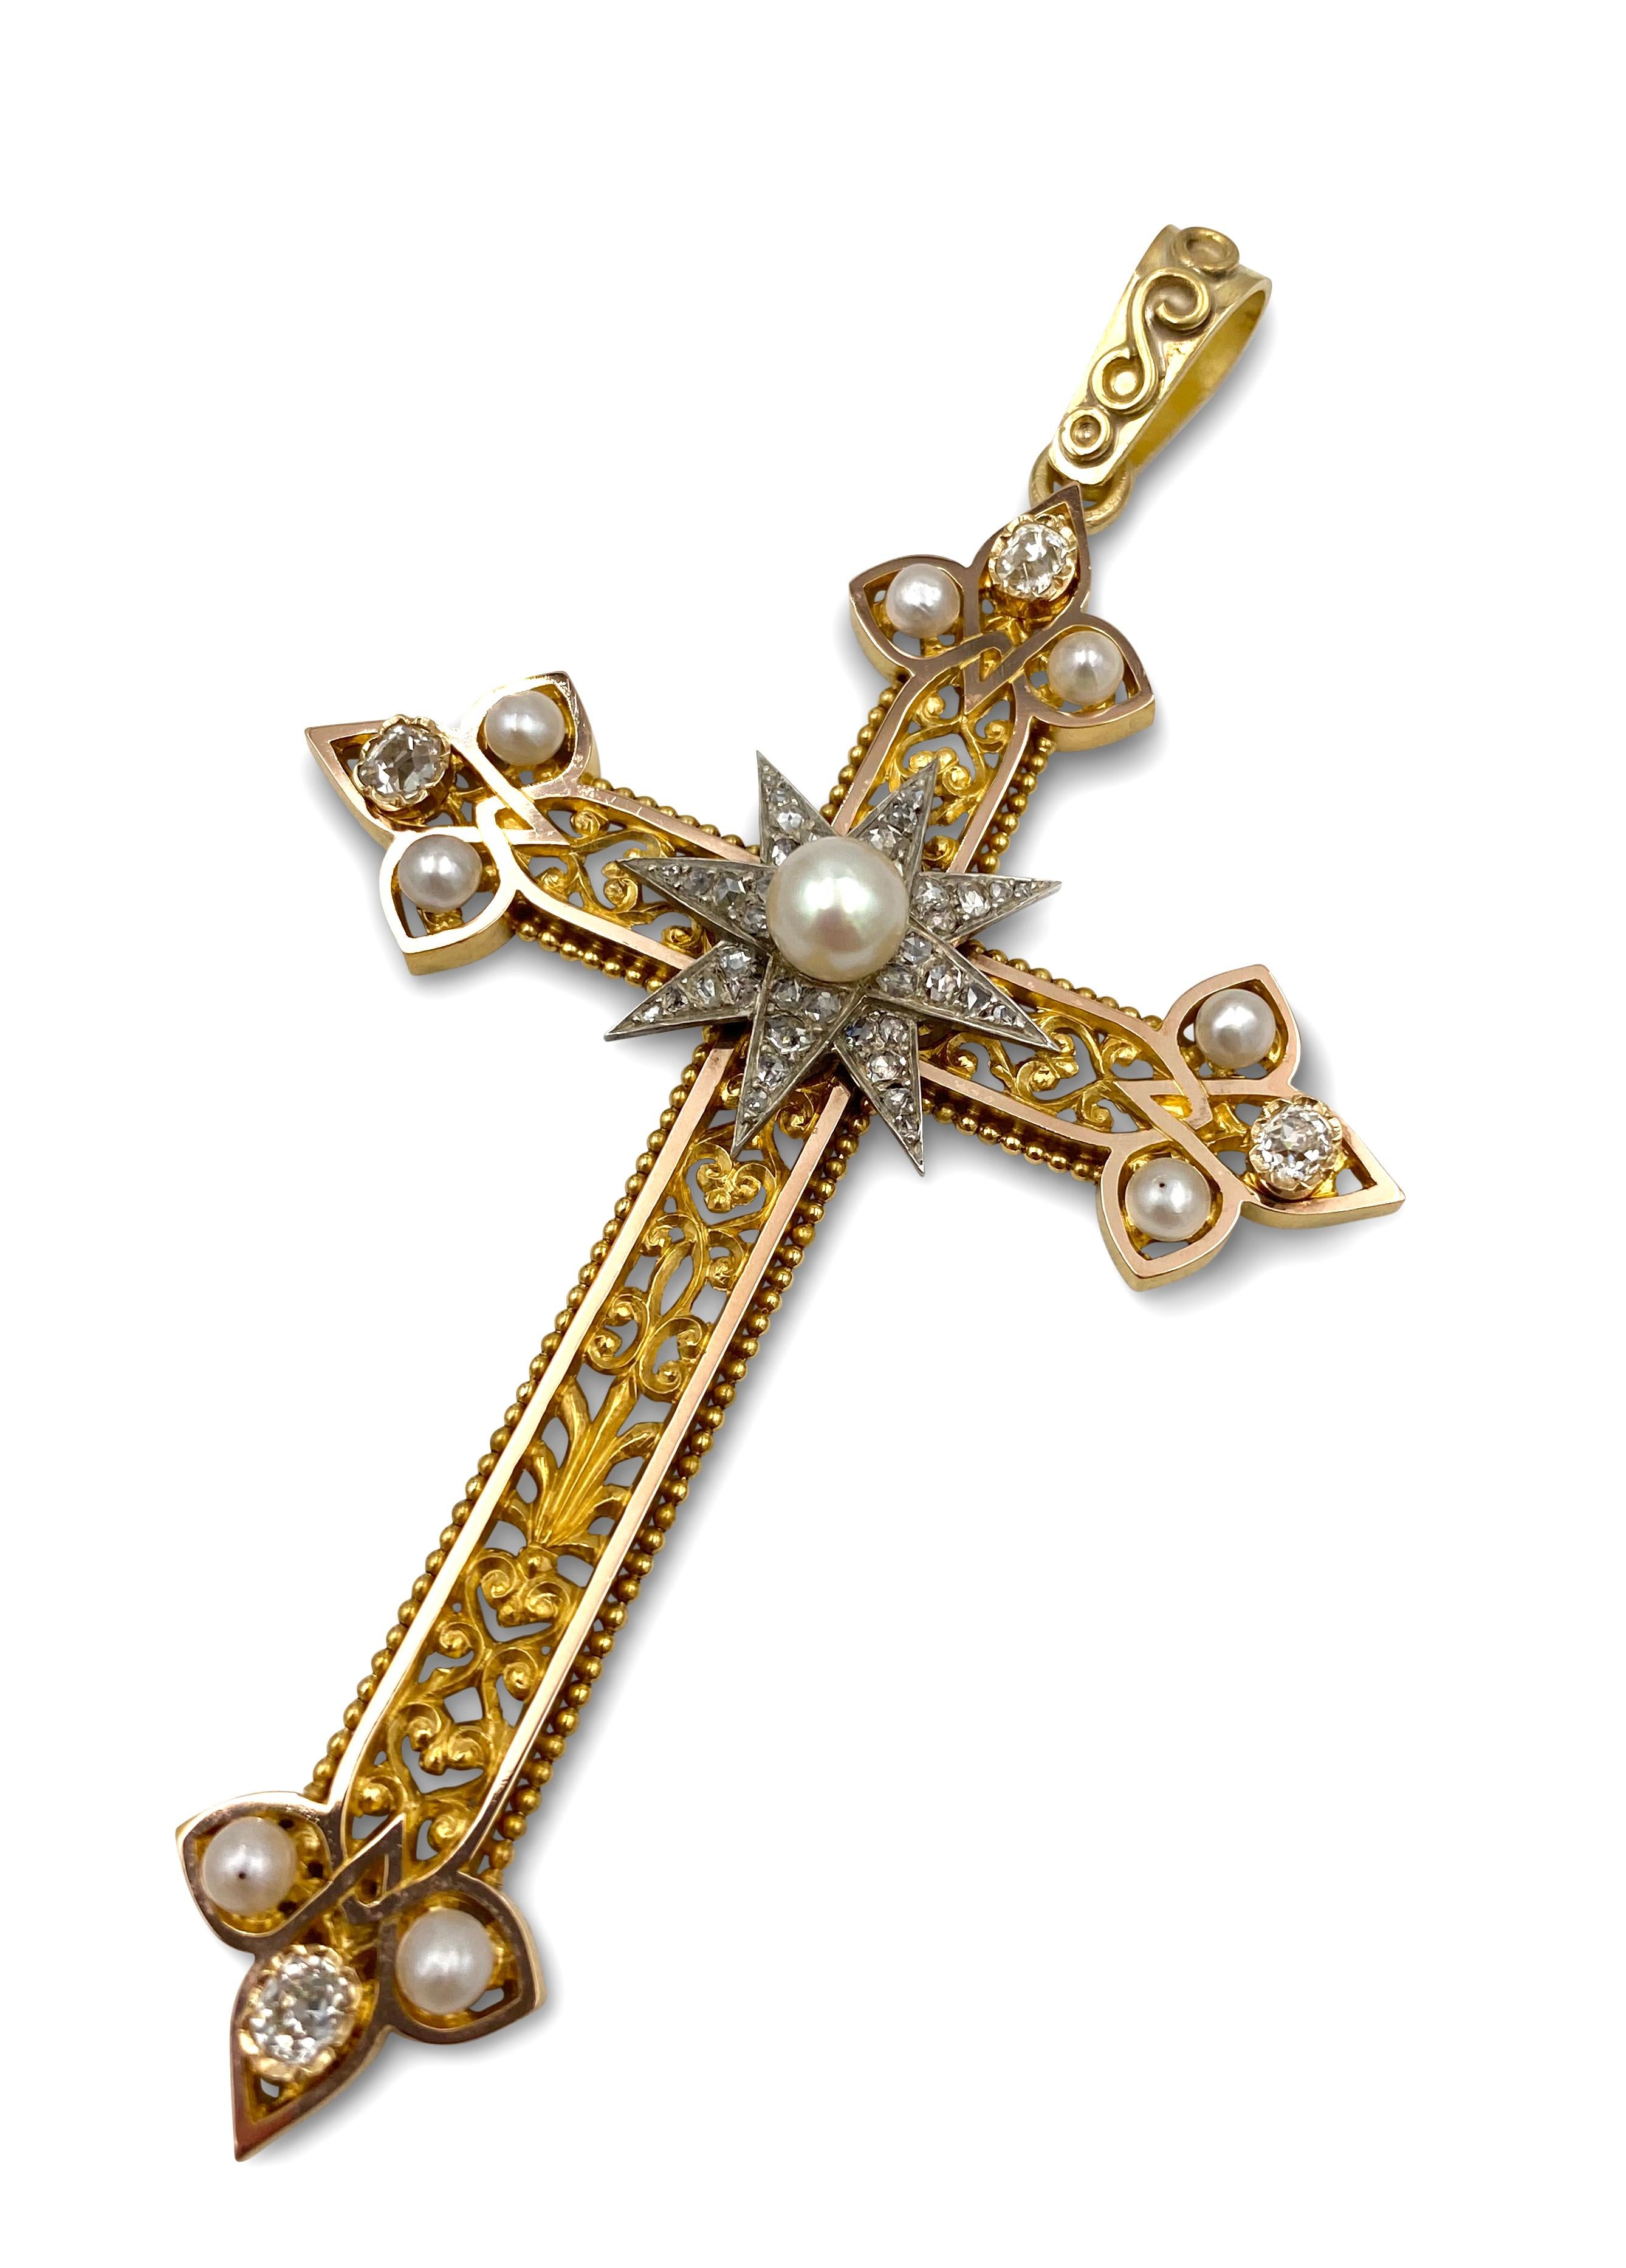 An antique Georgian cross pendant crafted in 18 karat yellow gold and silver. The pendant is set with cream-colored natural pearls and approx. 0.90 carats of rose and old mine cut diamonds. The pendant measures 95 x 55m. Excellent antique condition.